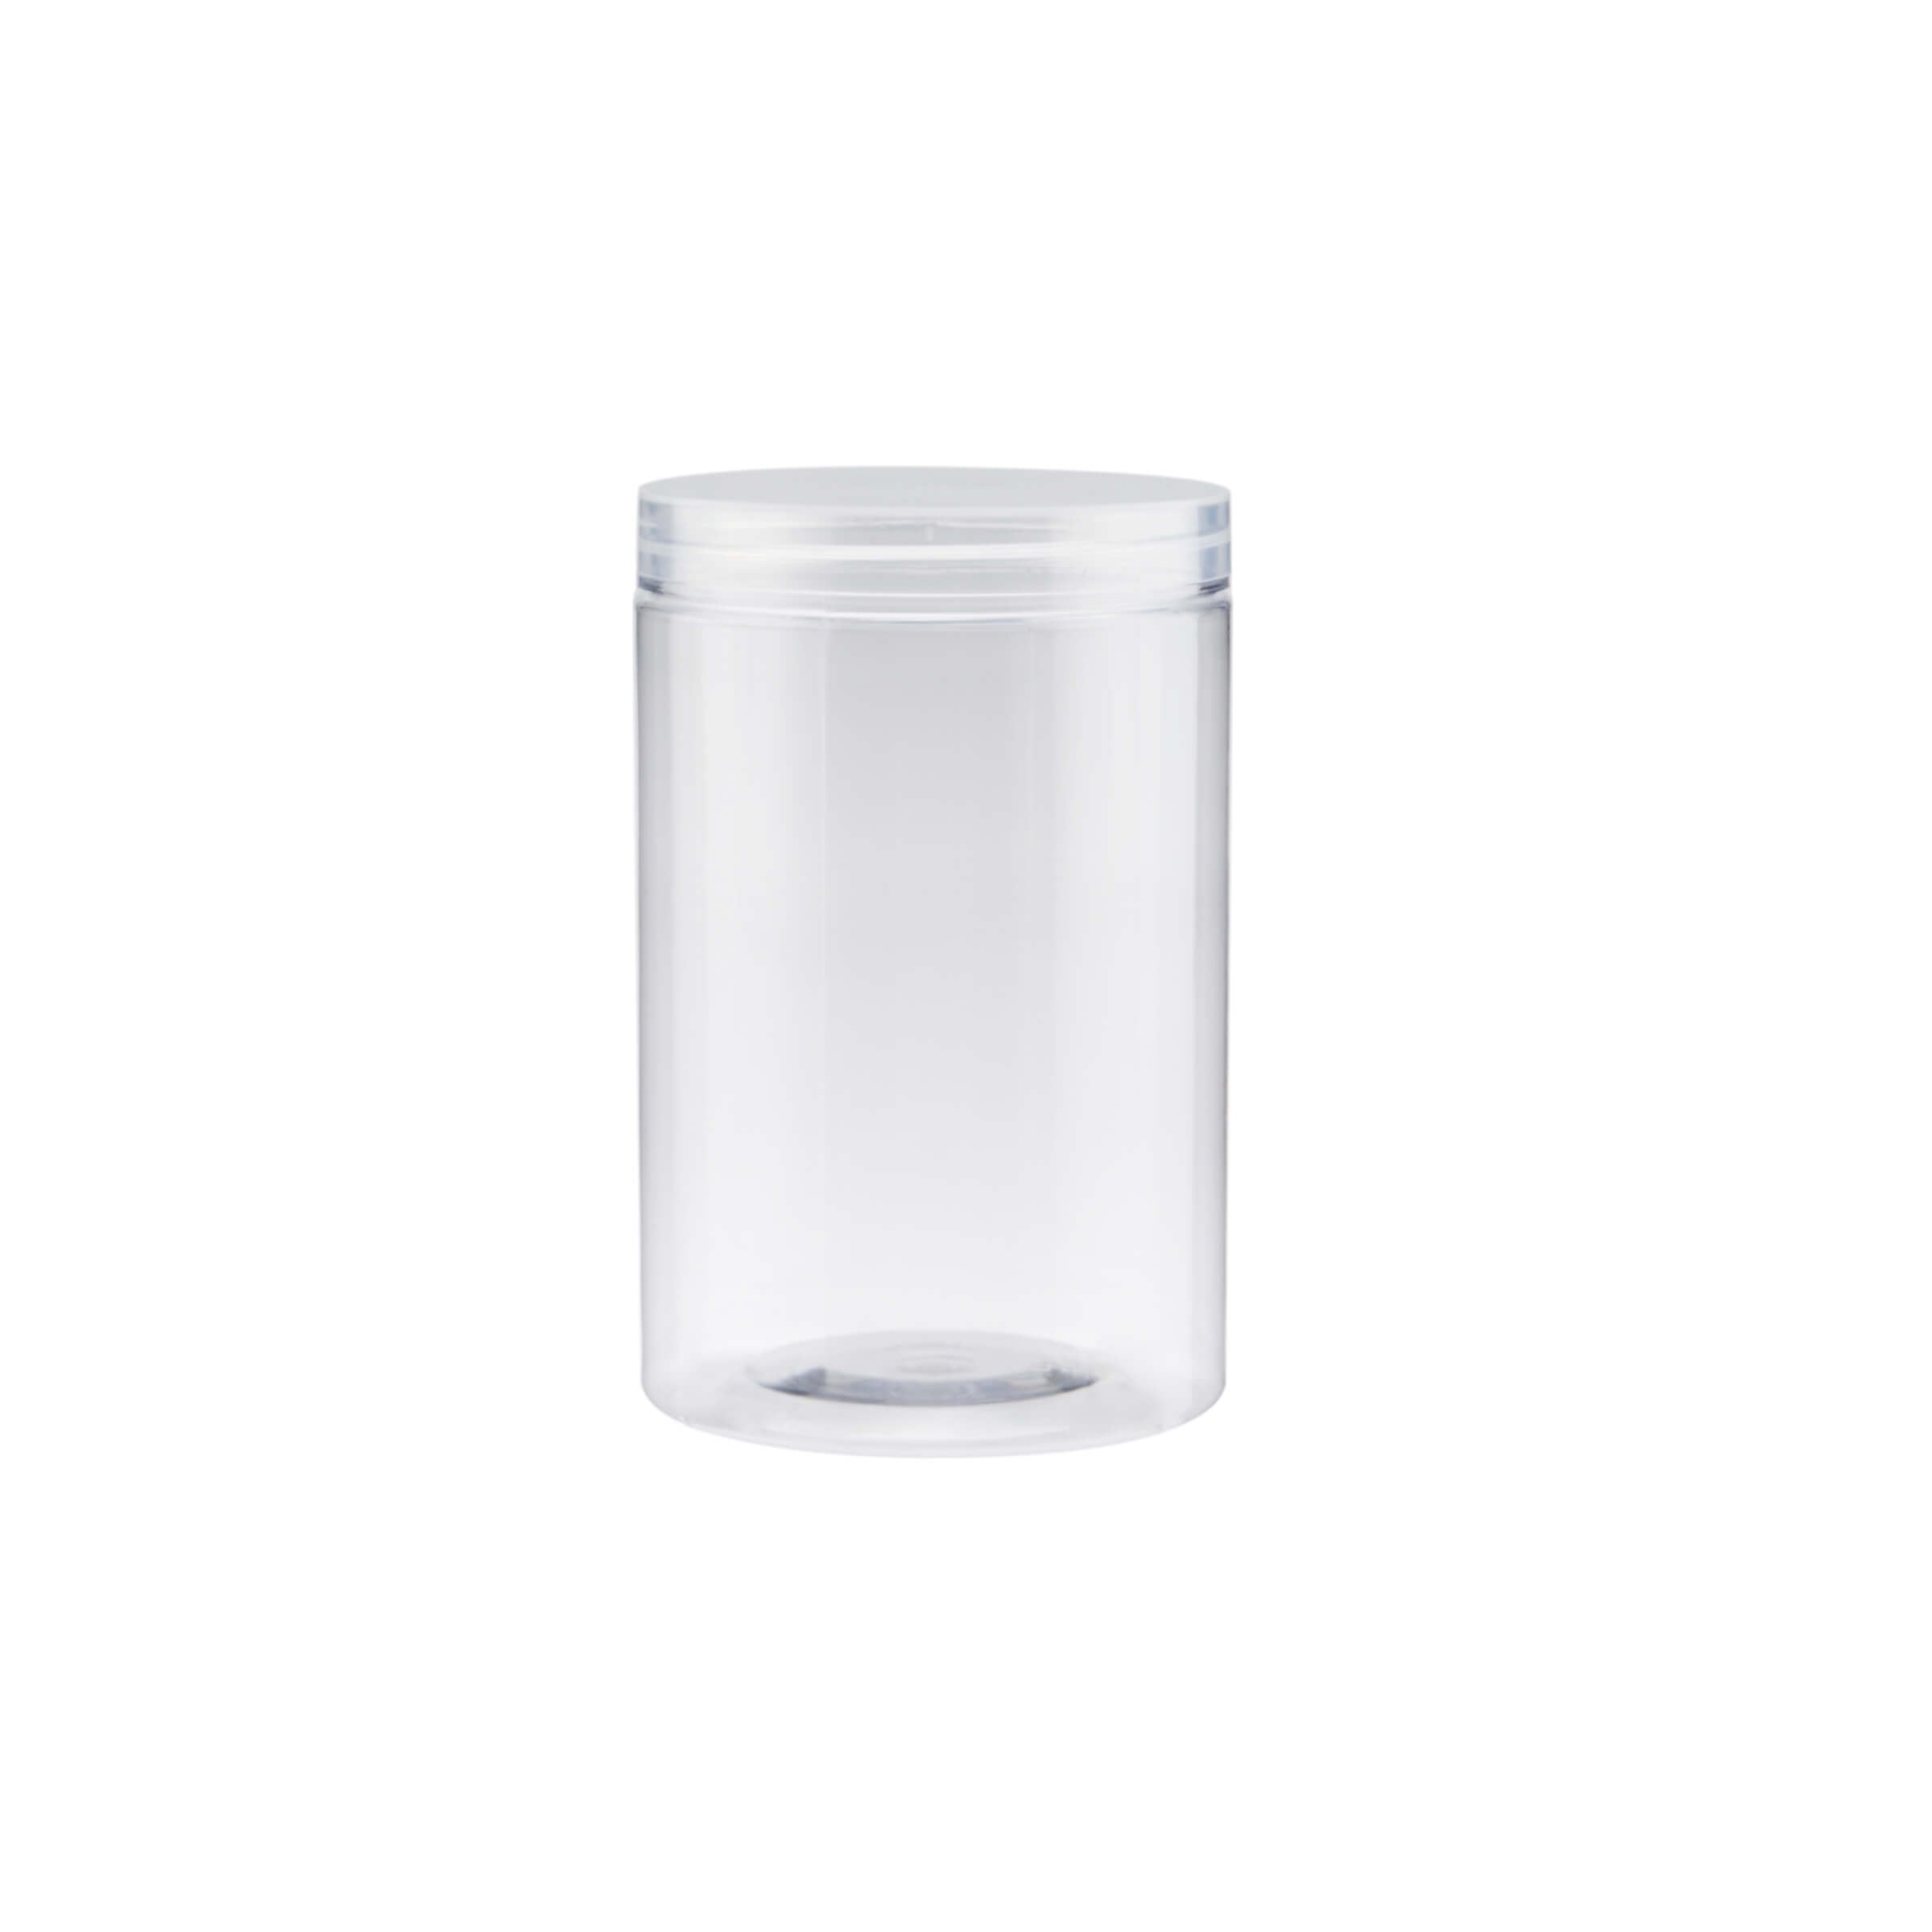 Plastic Cookie Jar With Clear Lid